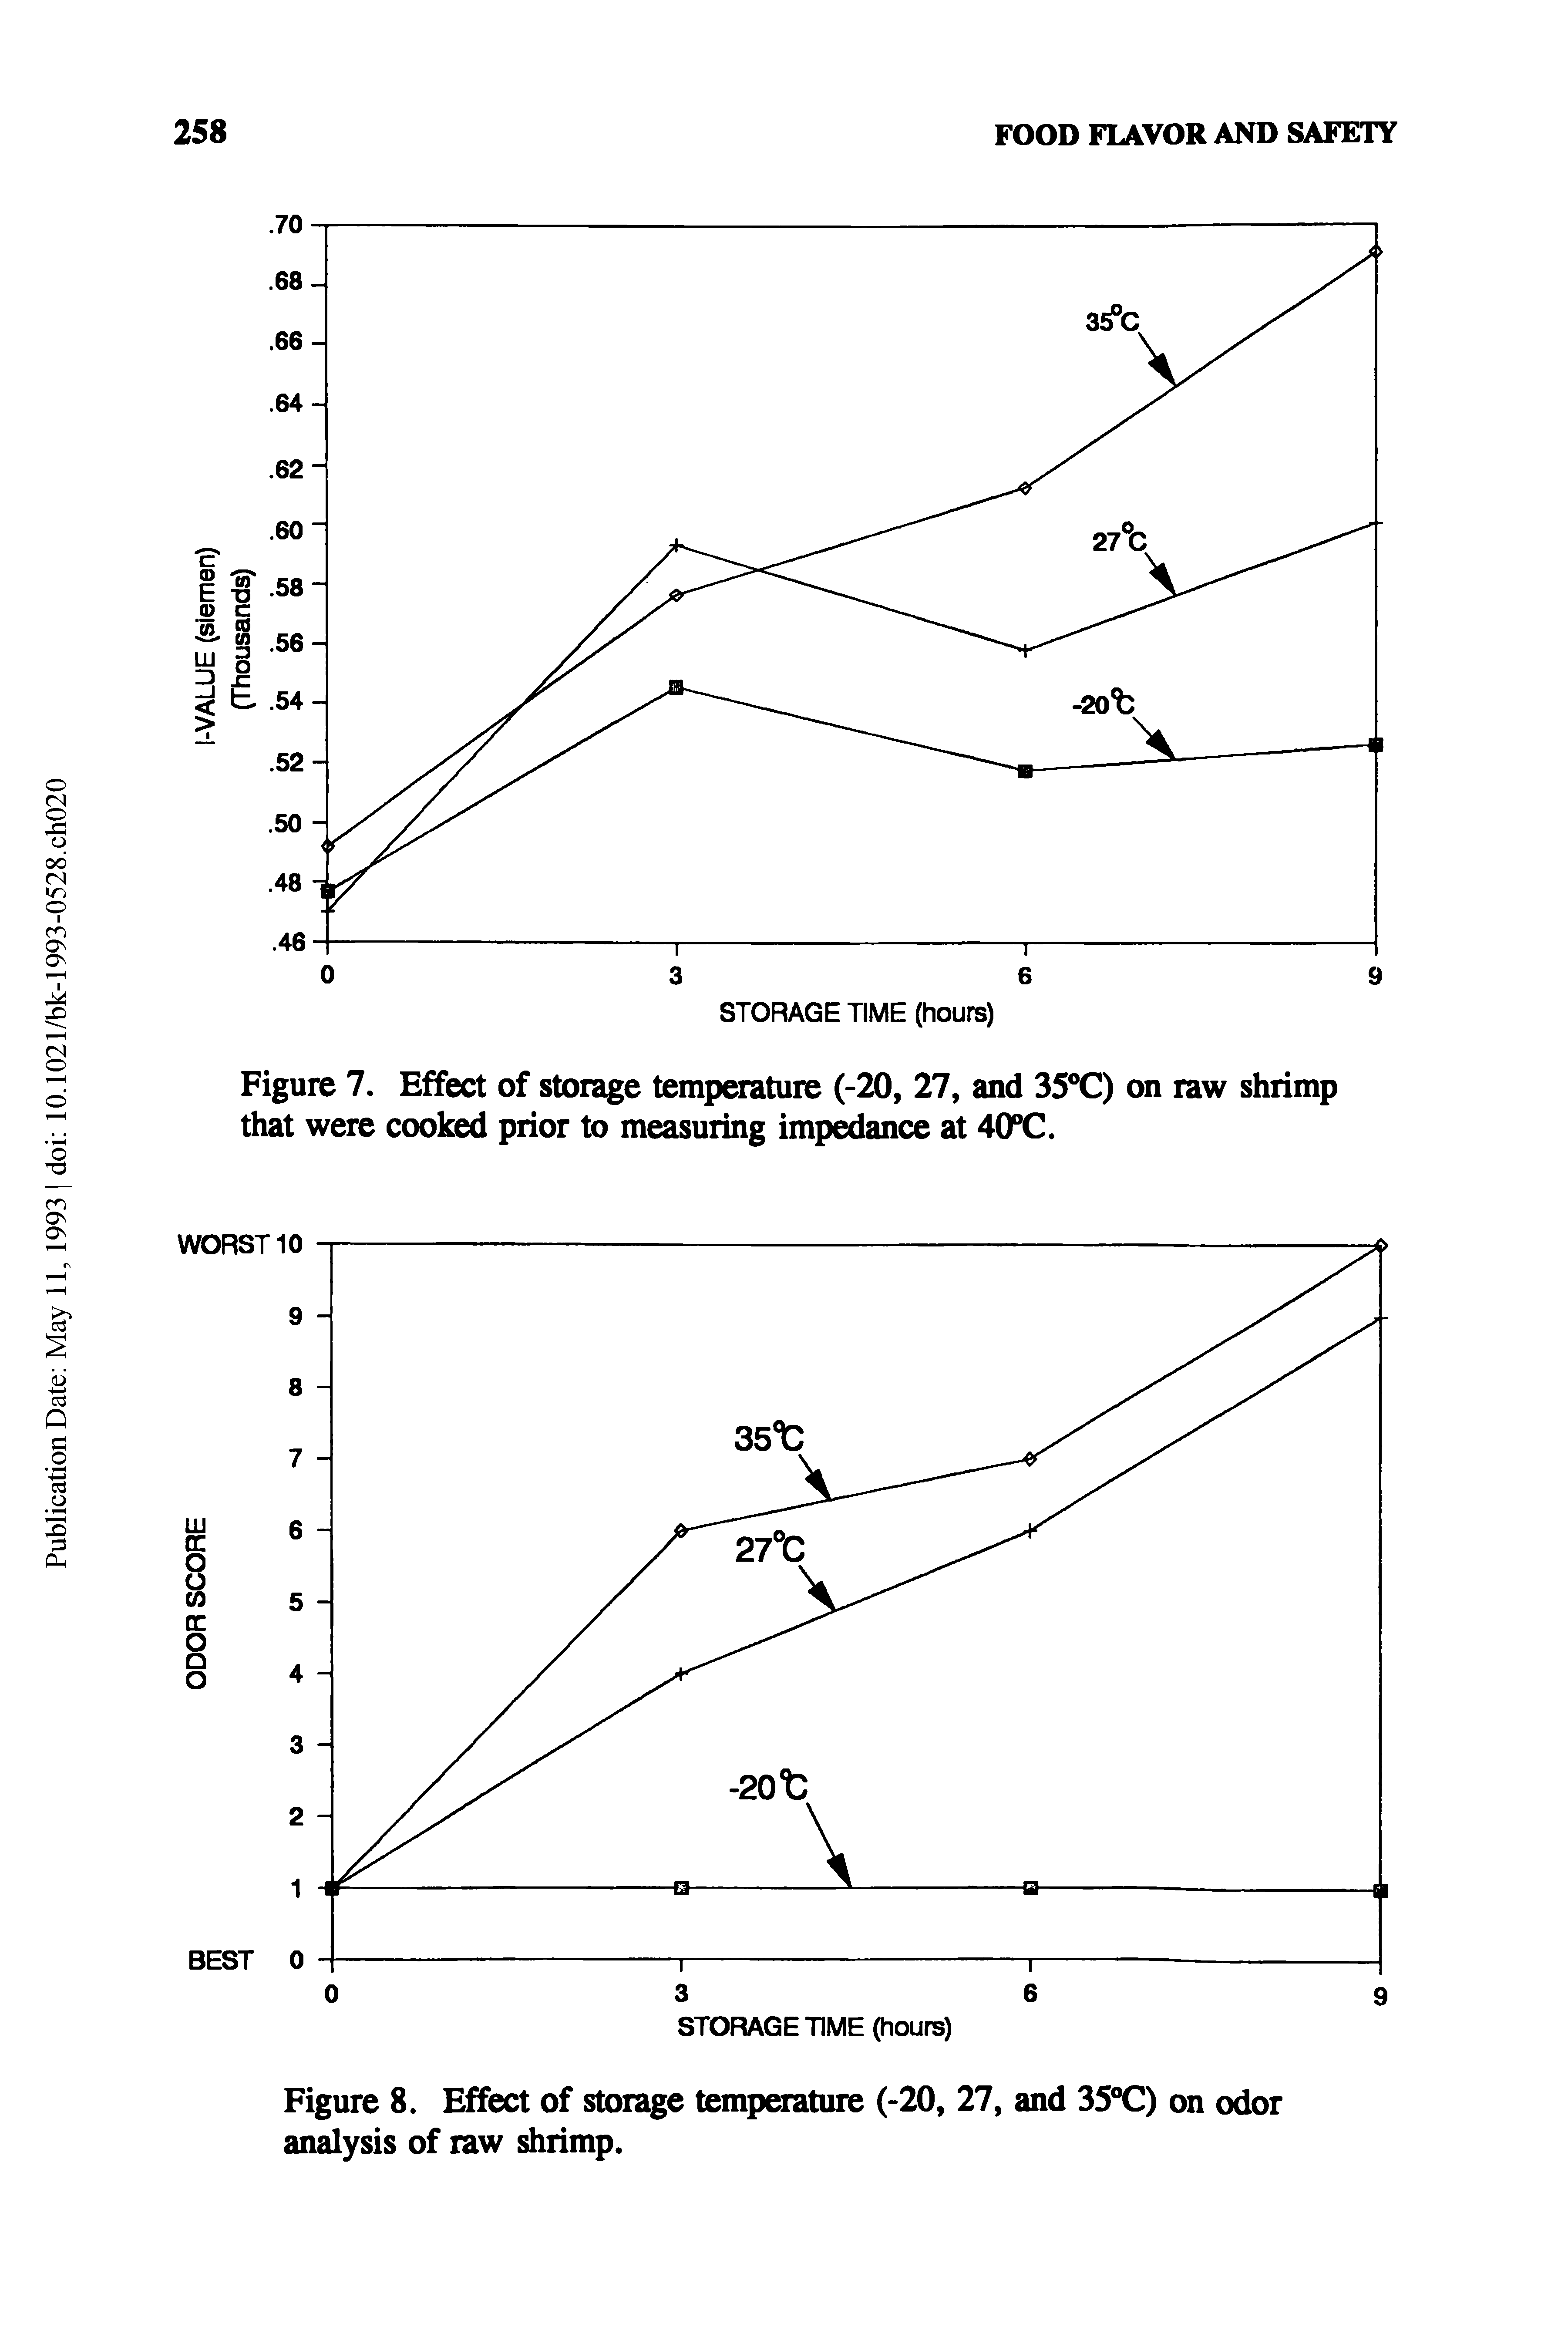 Figure 8. Effect of storage temperature (-20, 27, and 35°C) on odor analysis of raw shrimp.